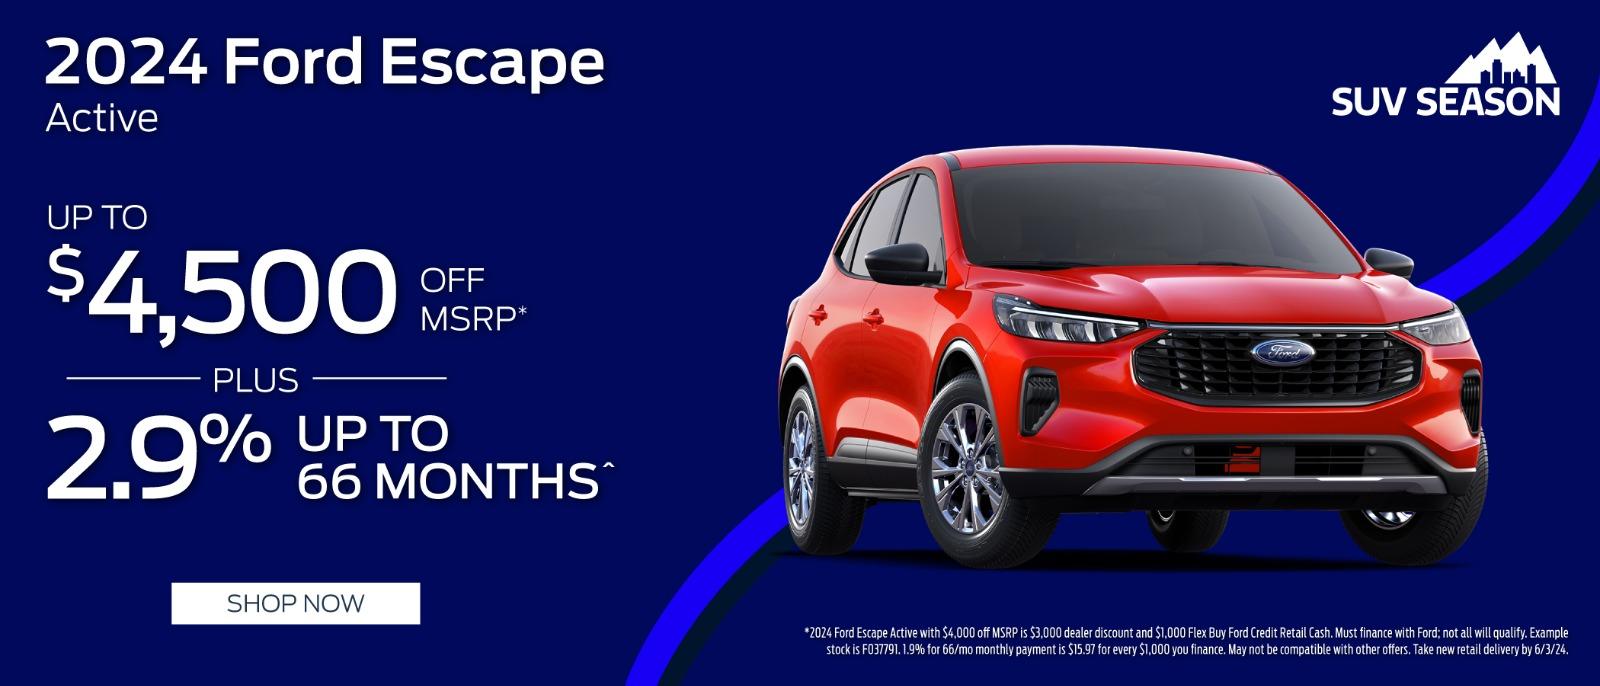 2024 Ford Escape $4,500 off MSRP plus 2.9%up to 66 months